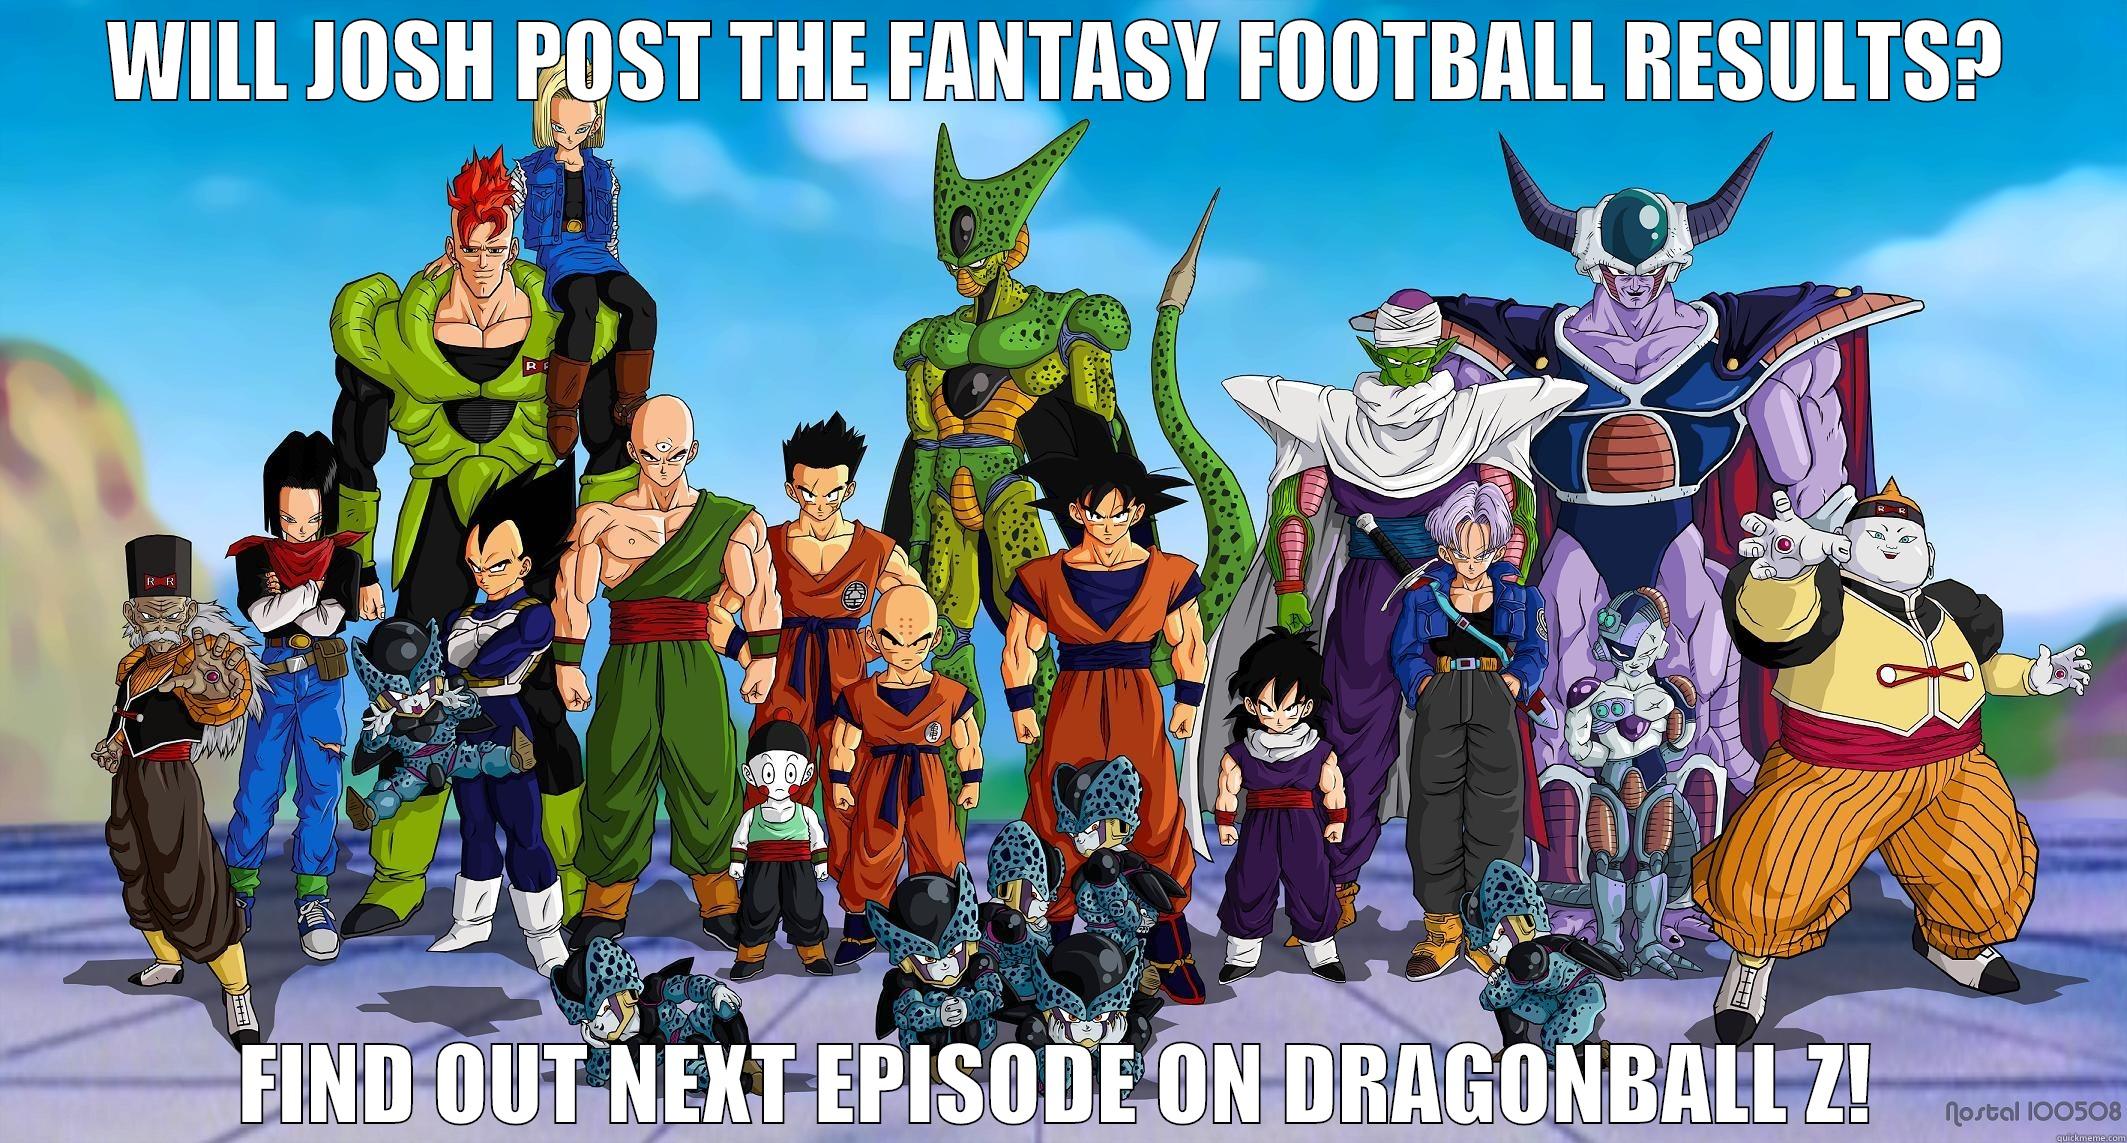 find out next time! - WILL JOSH POST THE FANTASY FOOTBALL RESULTS? FIND OUT NEXT EPISODE ON DRAGONBALL Z! Misc